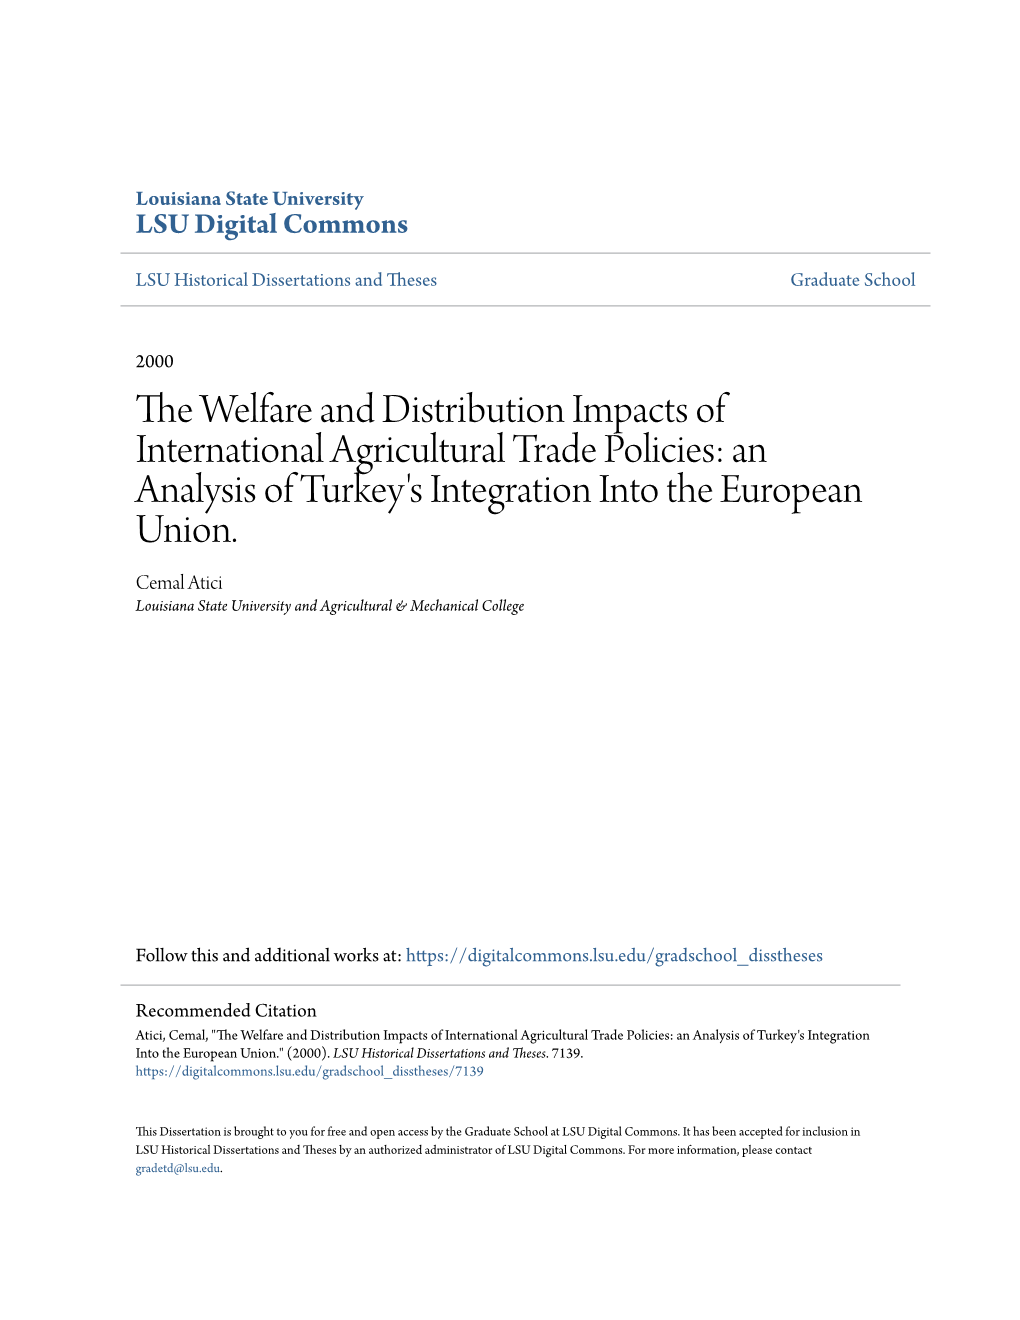 The Welfare and Distribution Impacts of International Agricultural Trade Policies: an Analysis of Turkey’S Integration Into the European Union